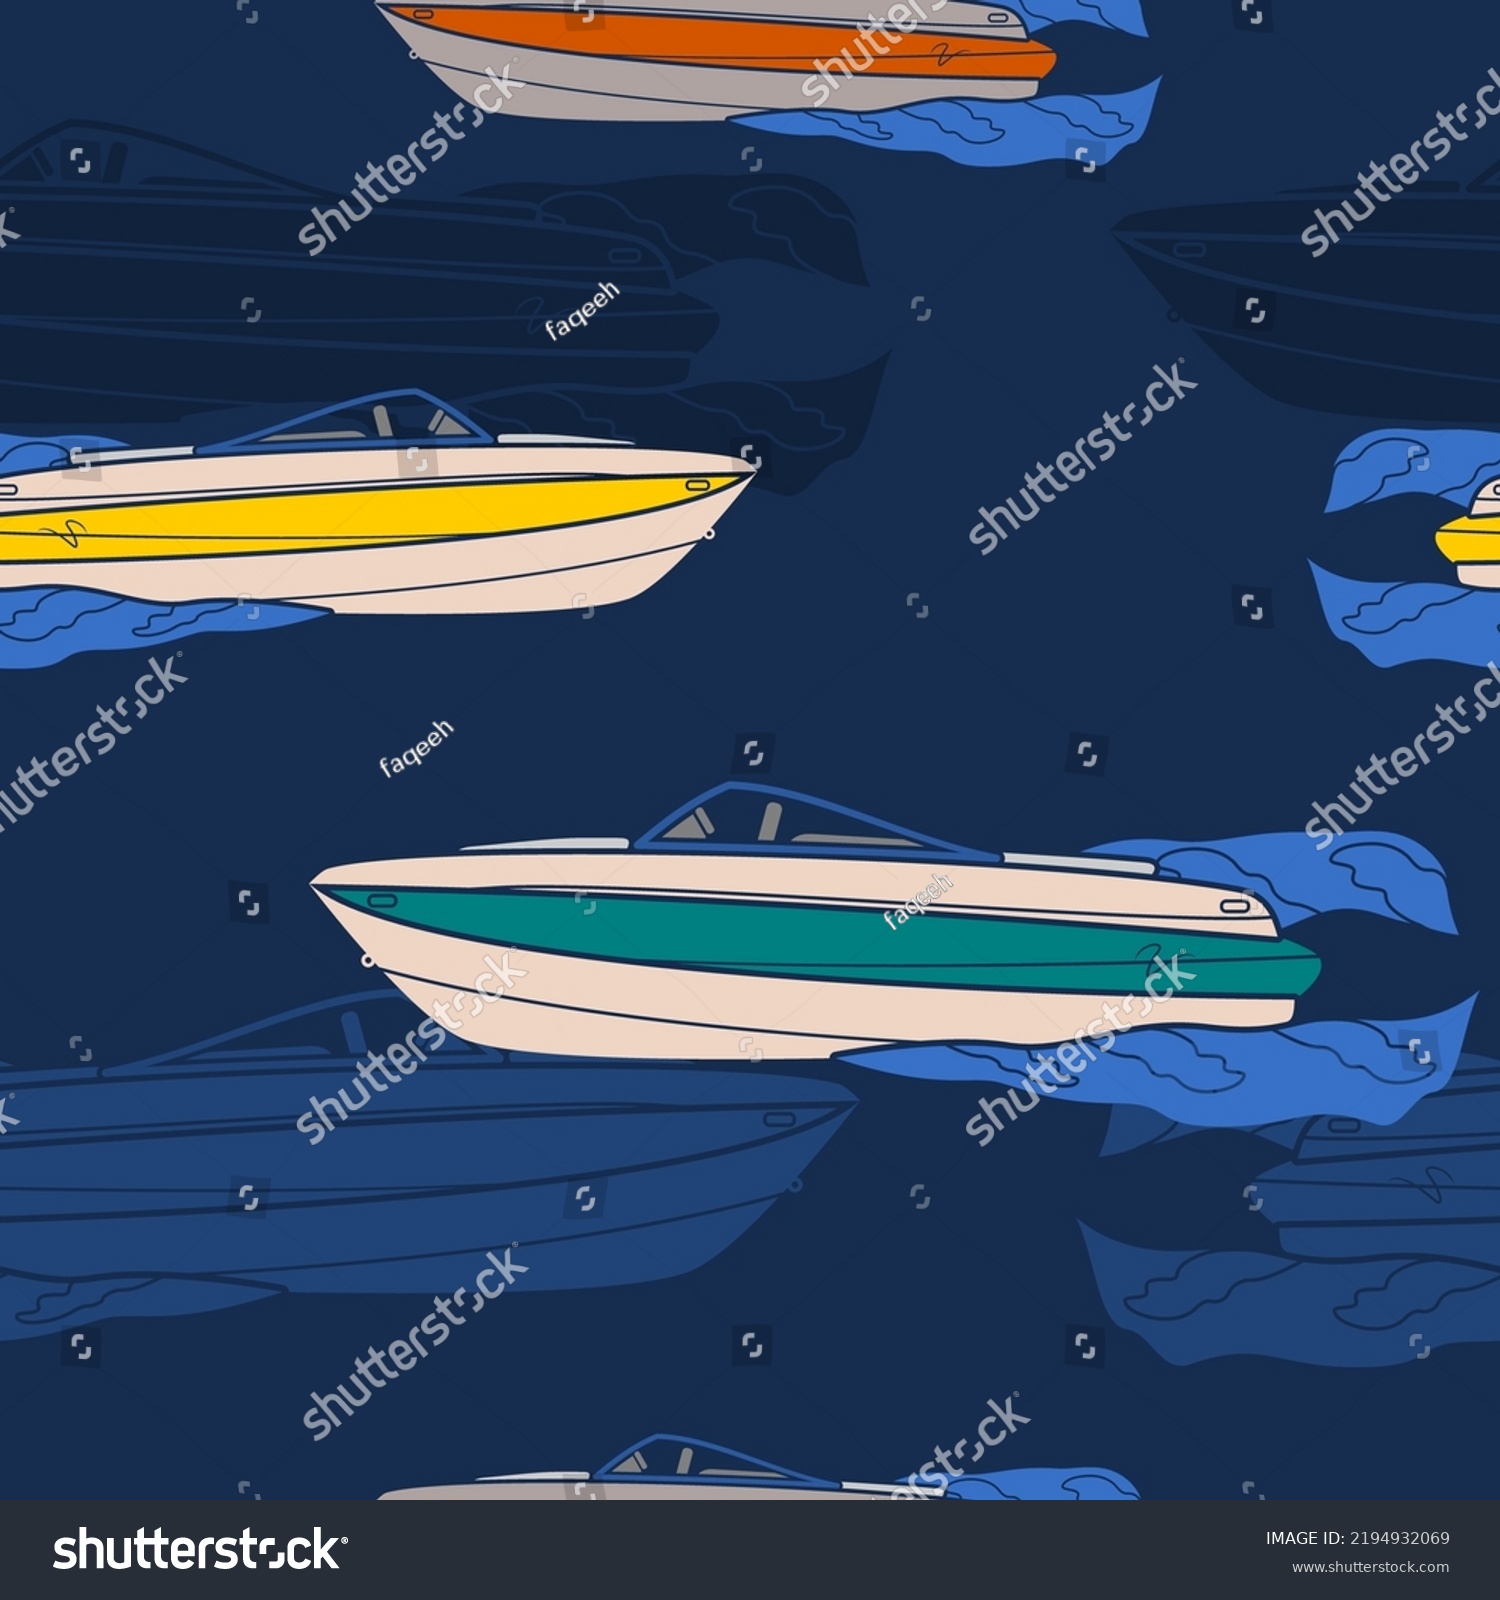 SVG of Editable Side View American Bowrider Boats in Various Colors on Water Vector Illustration as Seamless Pattern for Creating Background of Transportation or Recreation Related Design svg